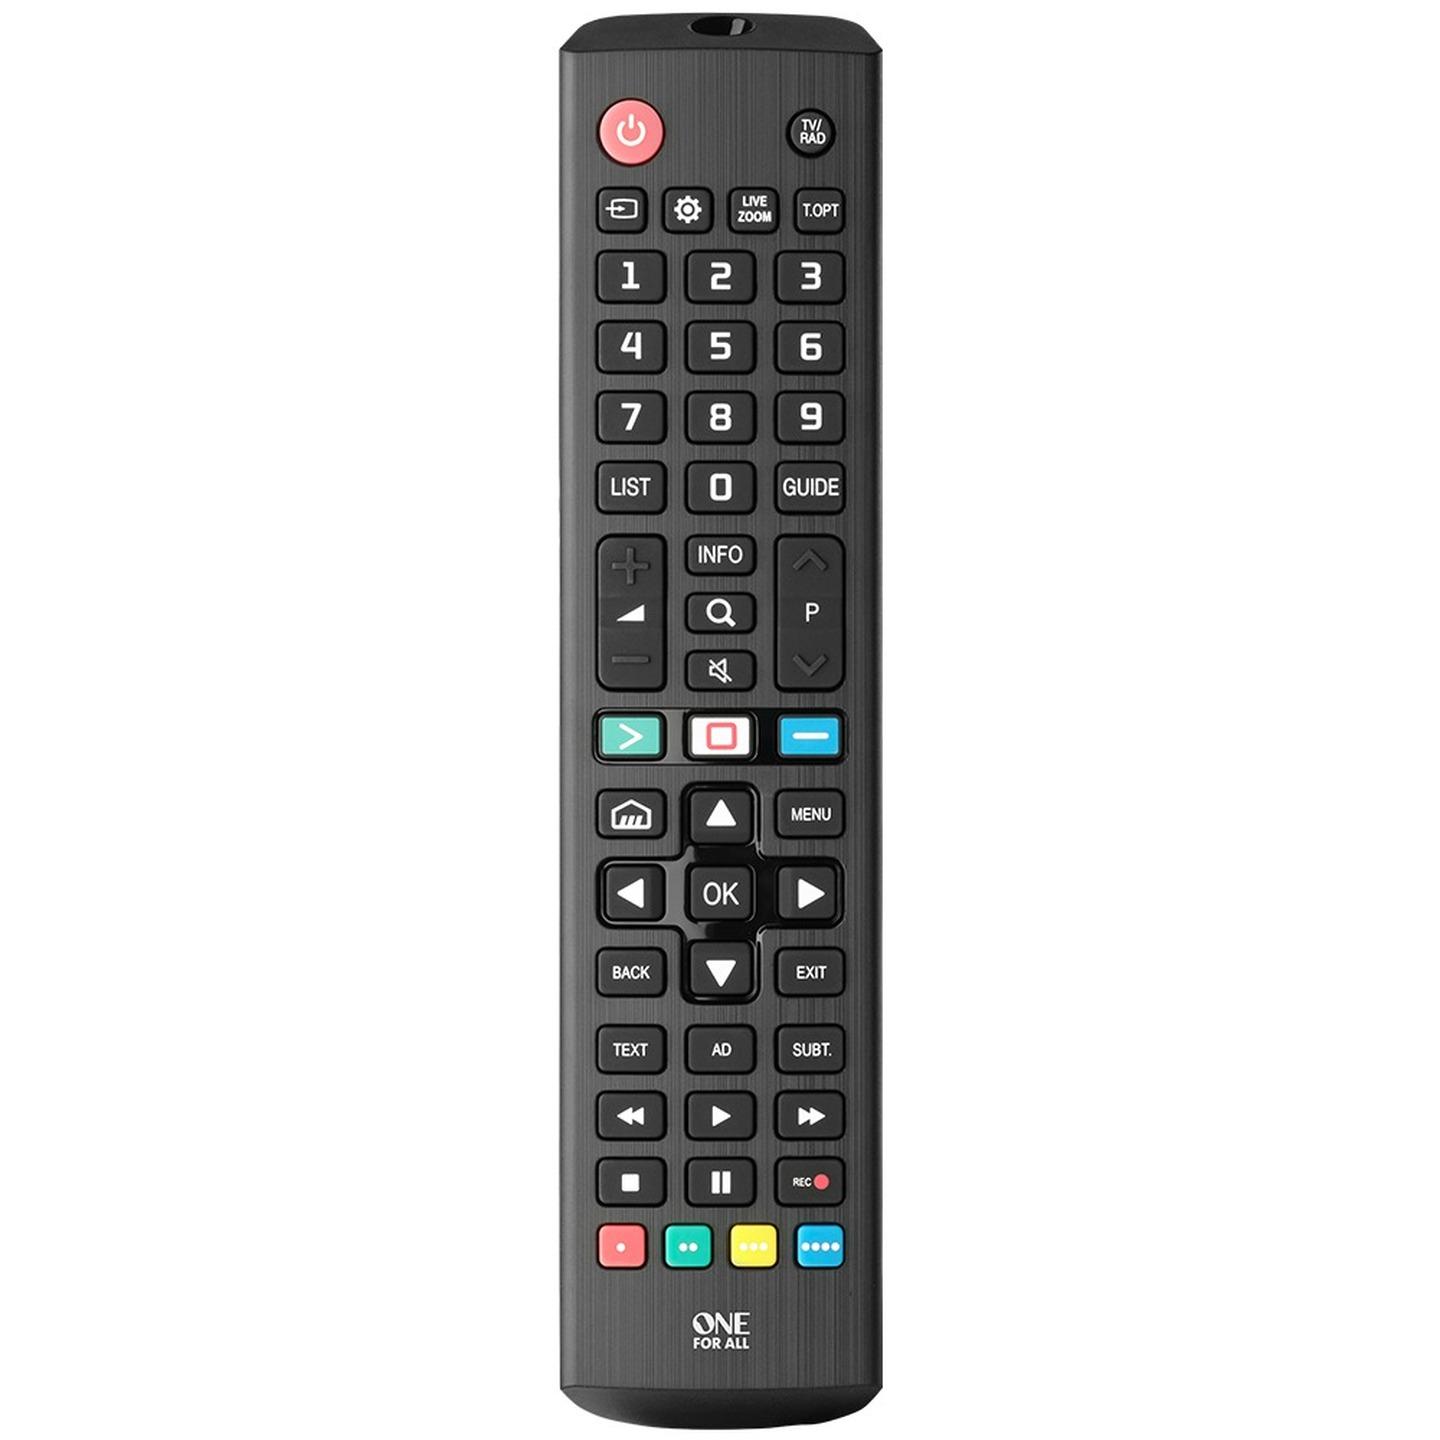 One For All Remote to suit LG TV with NET-TV